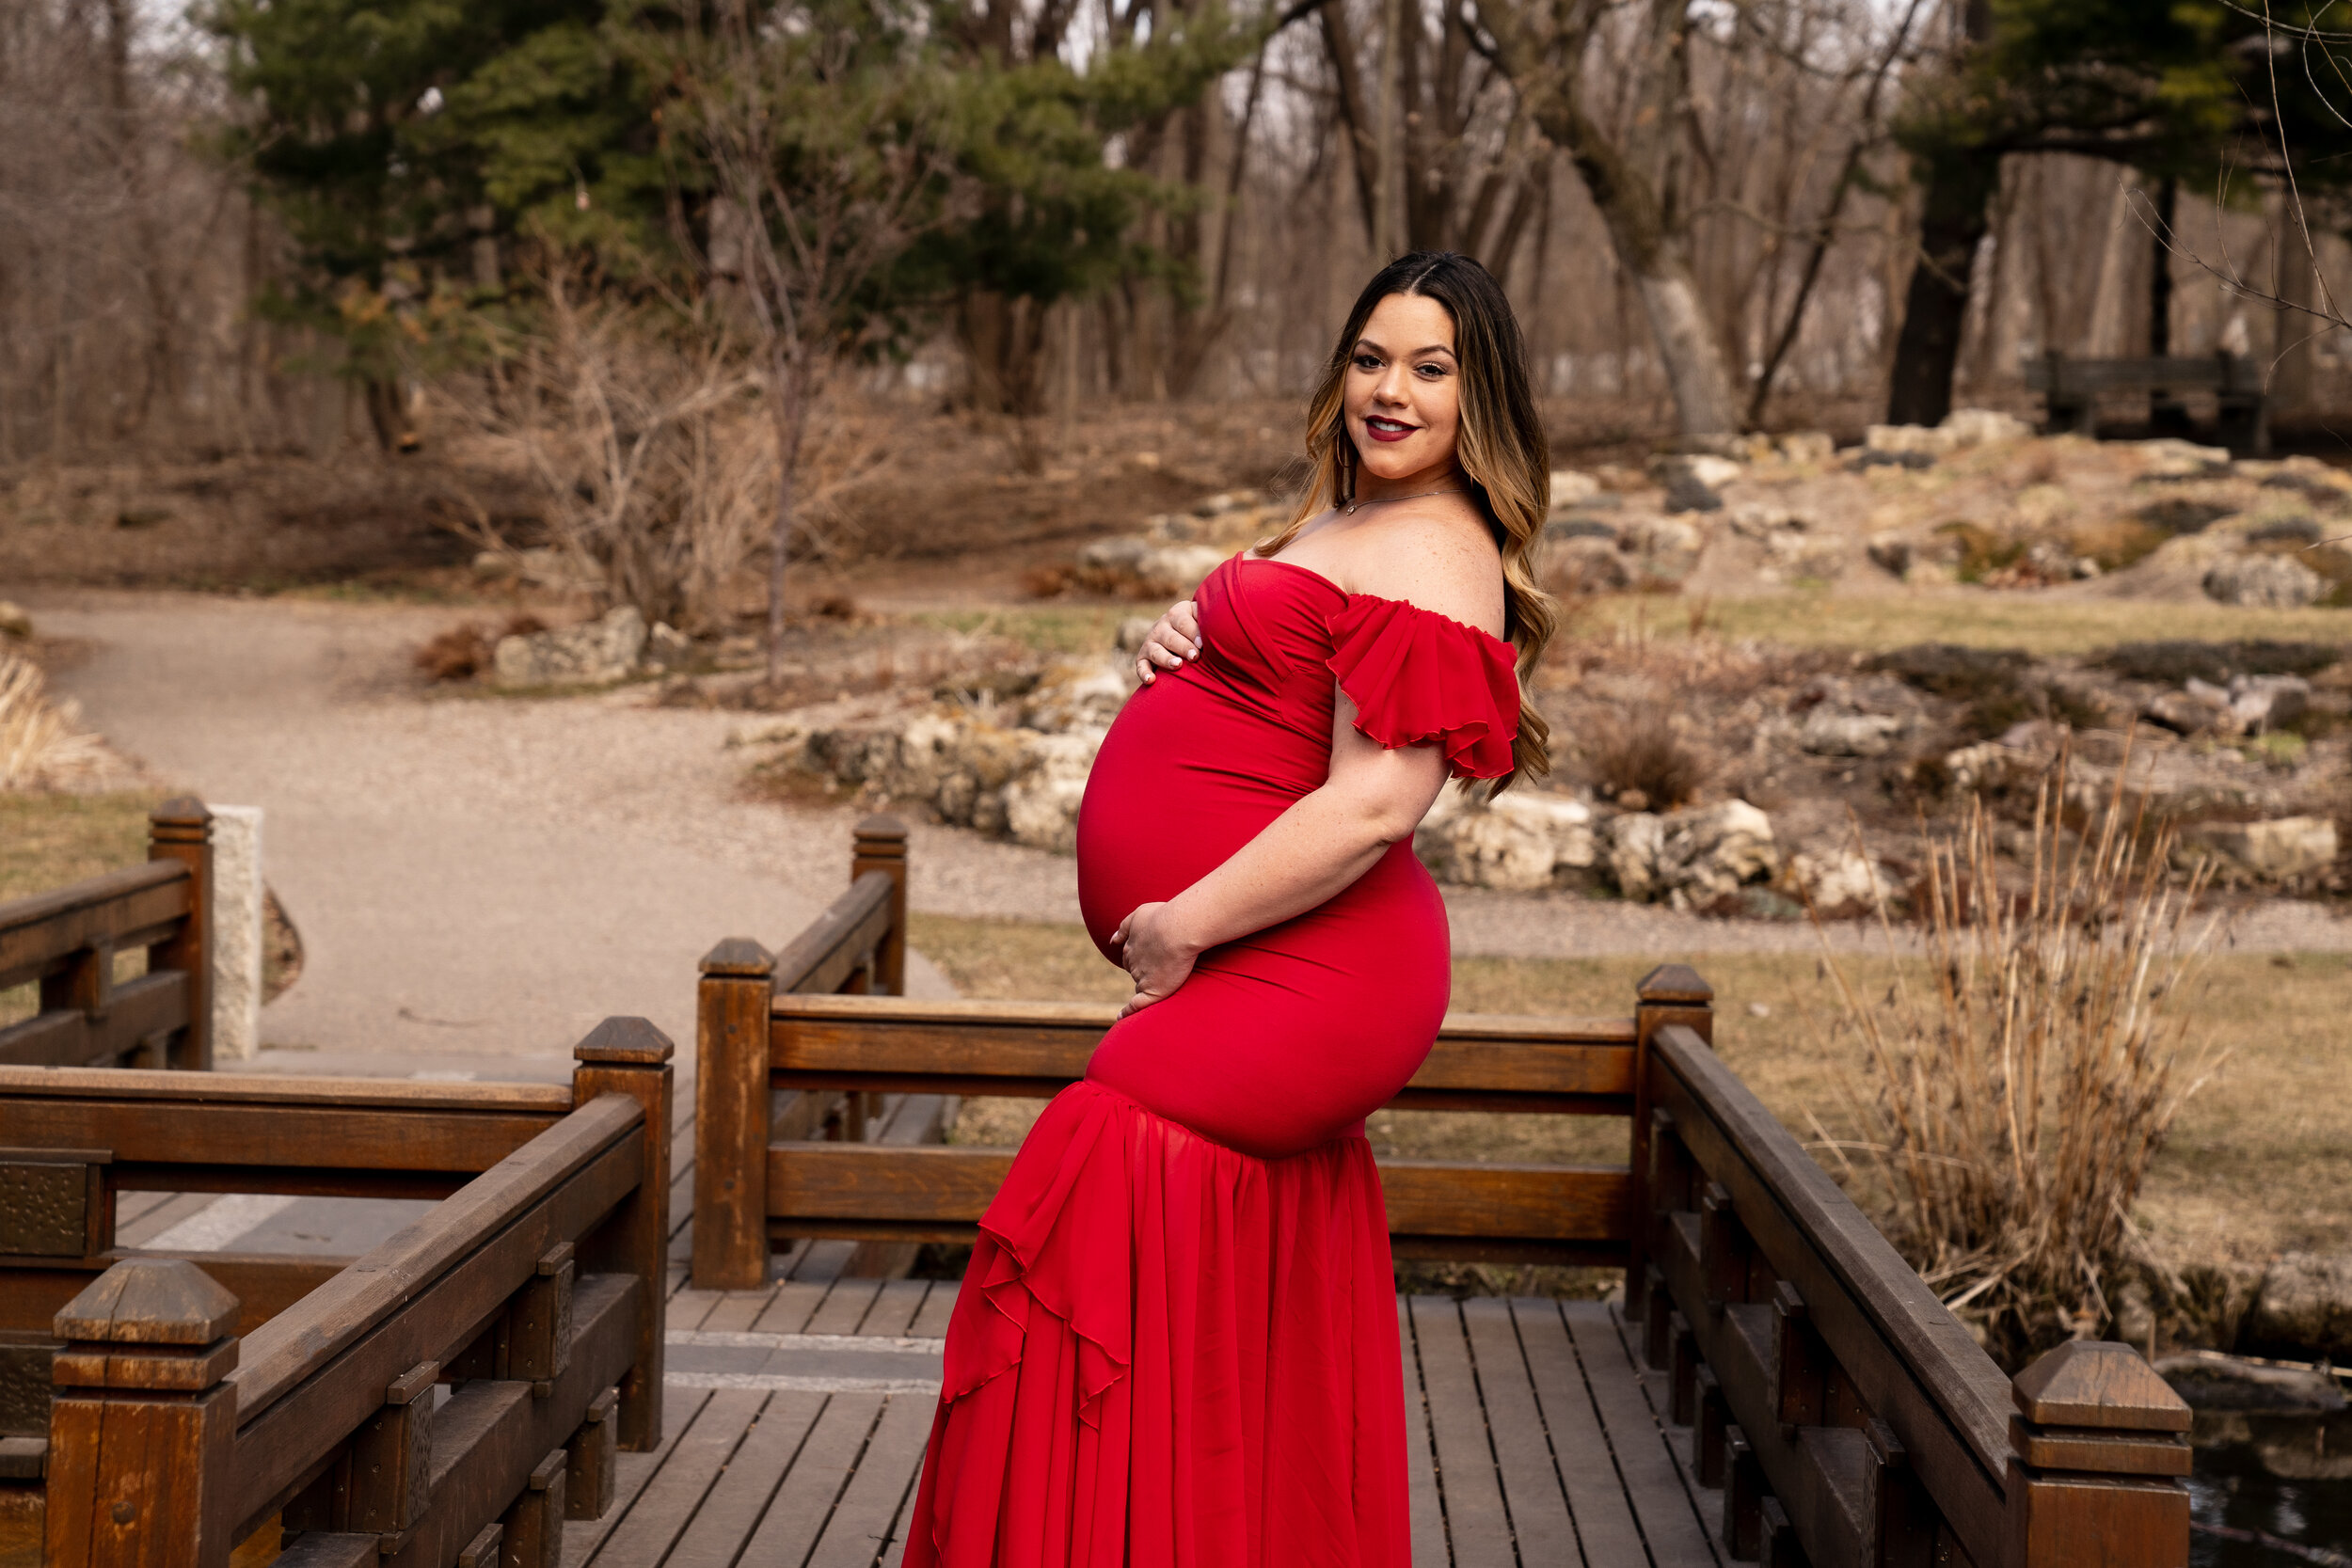 Mother to be in a vibrant red dress posed on a wooden walkway in Minneapolis